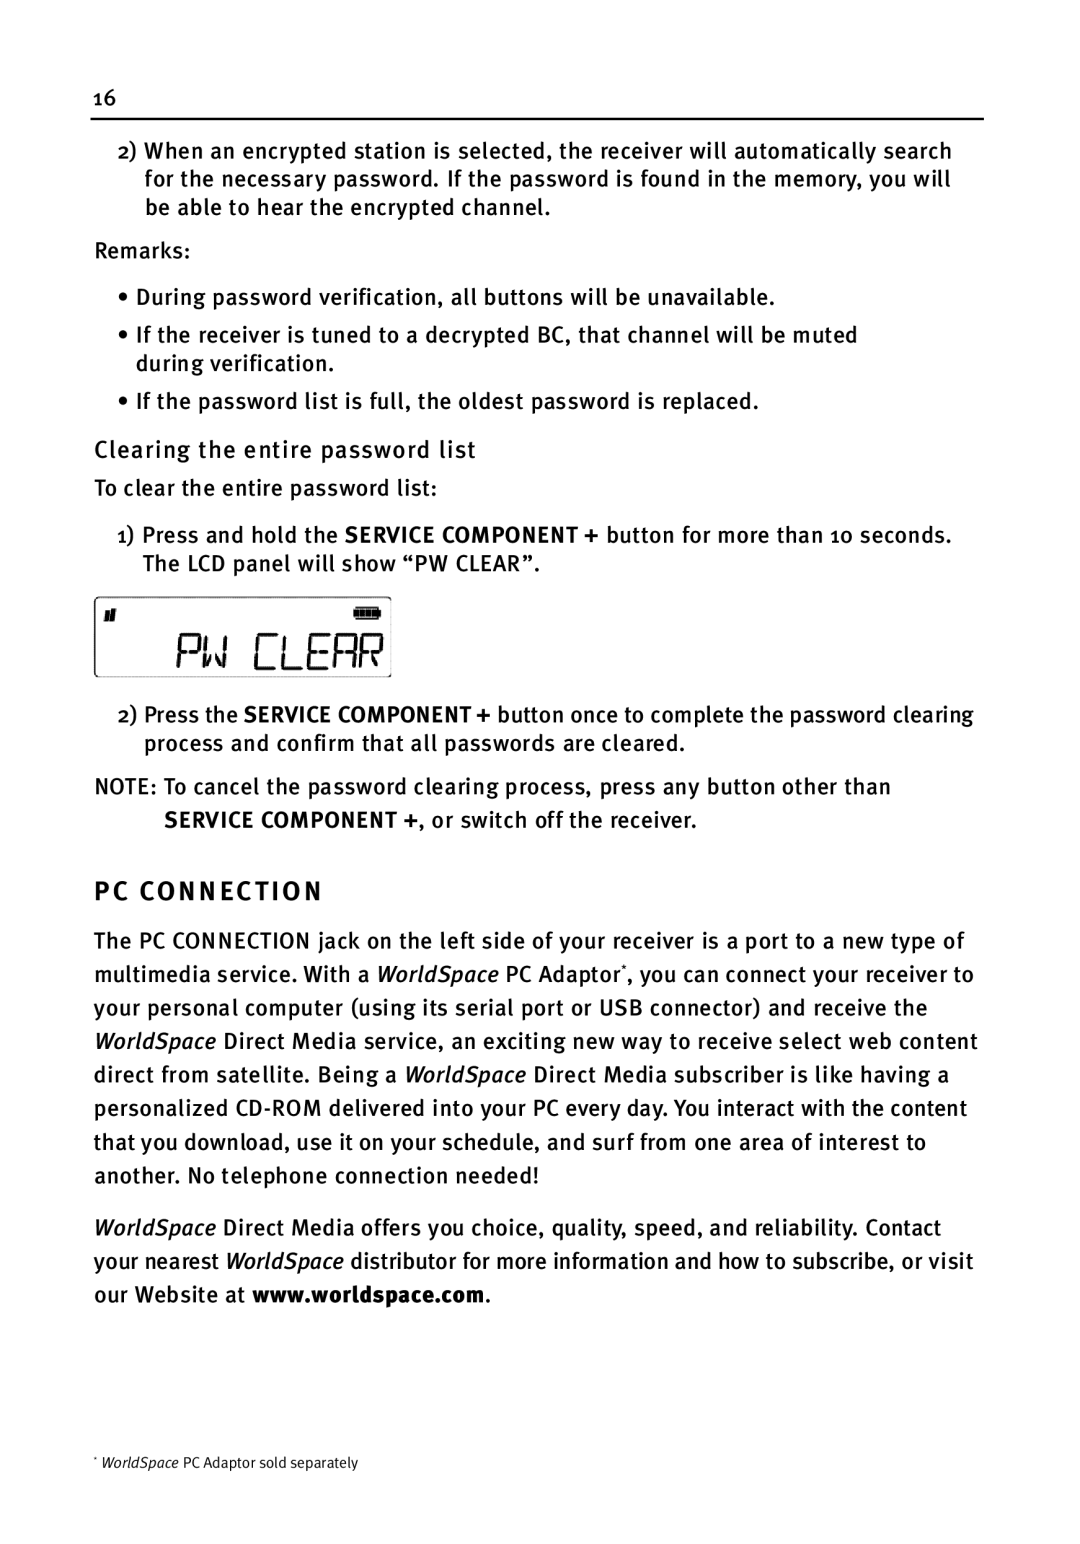 WorldSpace wssr-11 manual Pc Connection, Clearing the entire password list 